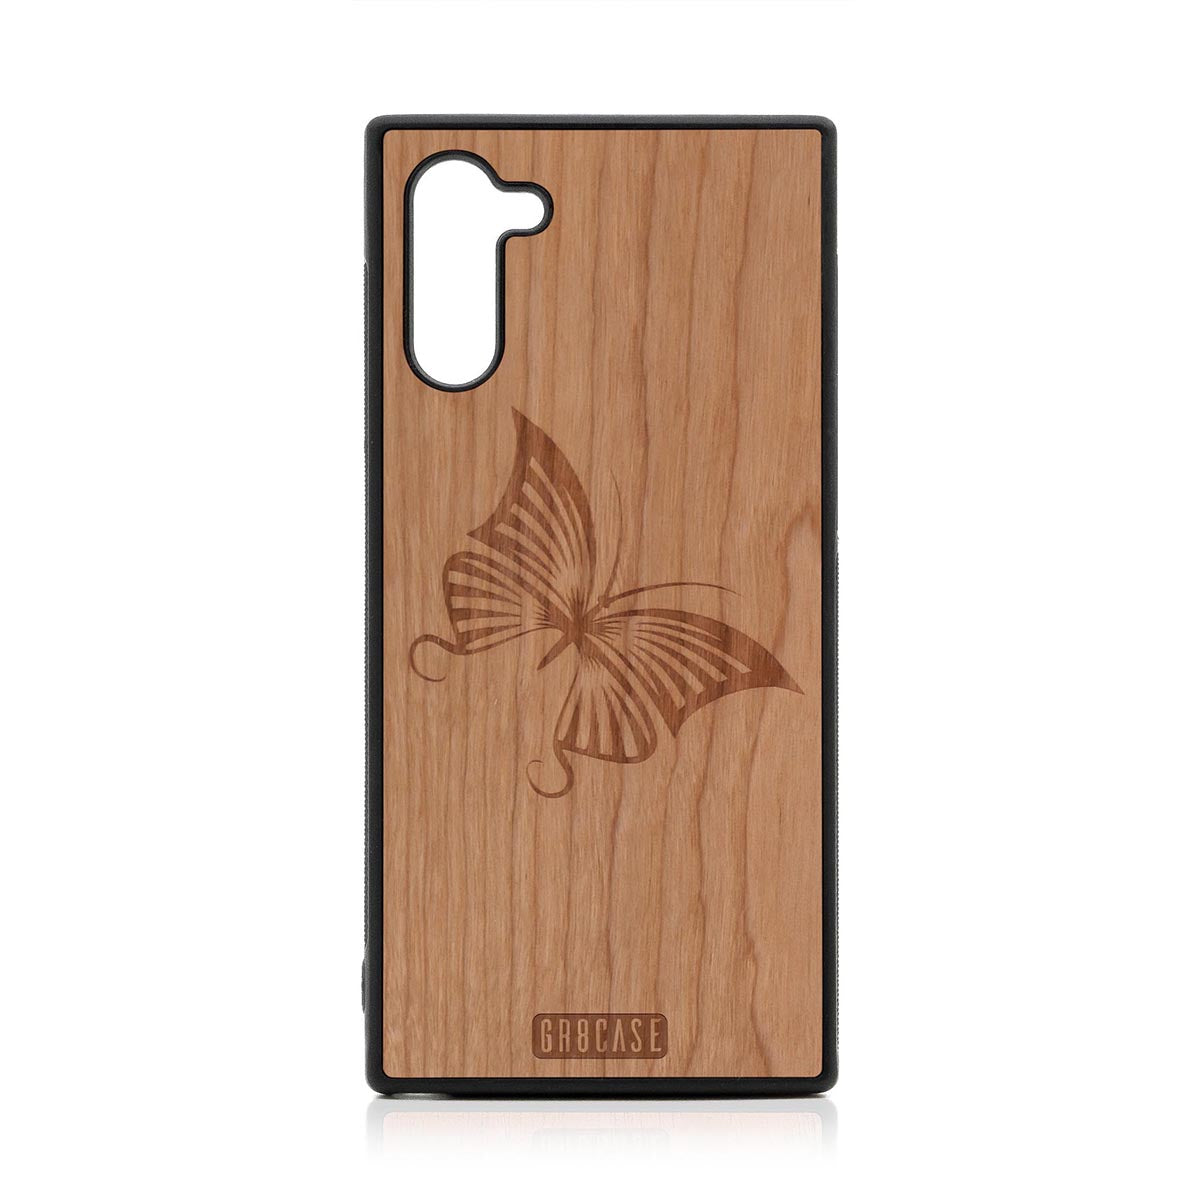 Butterfly Design Wood Case Samsung Galaxy Note 10 by GR8CASE